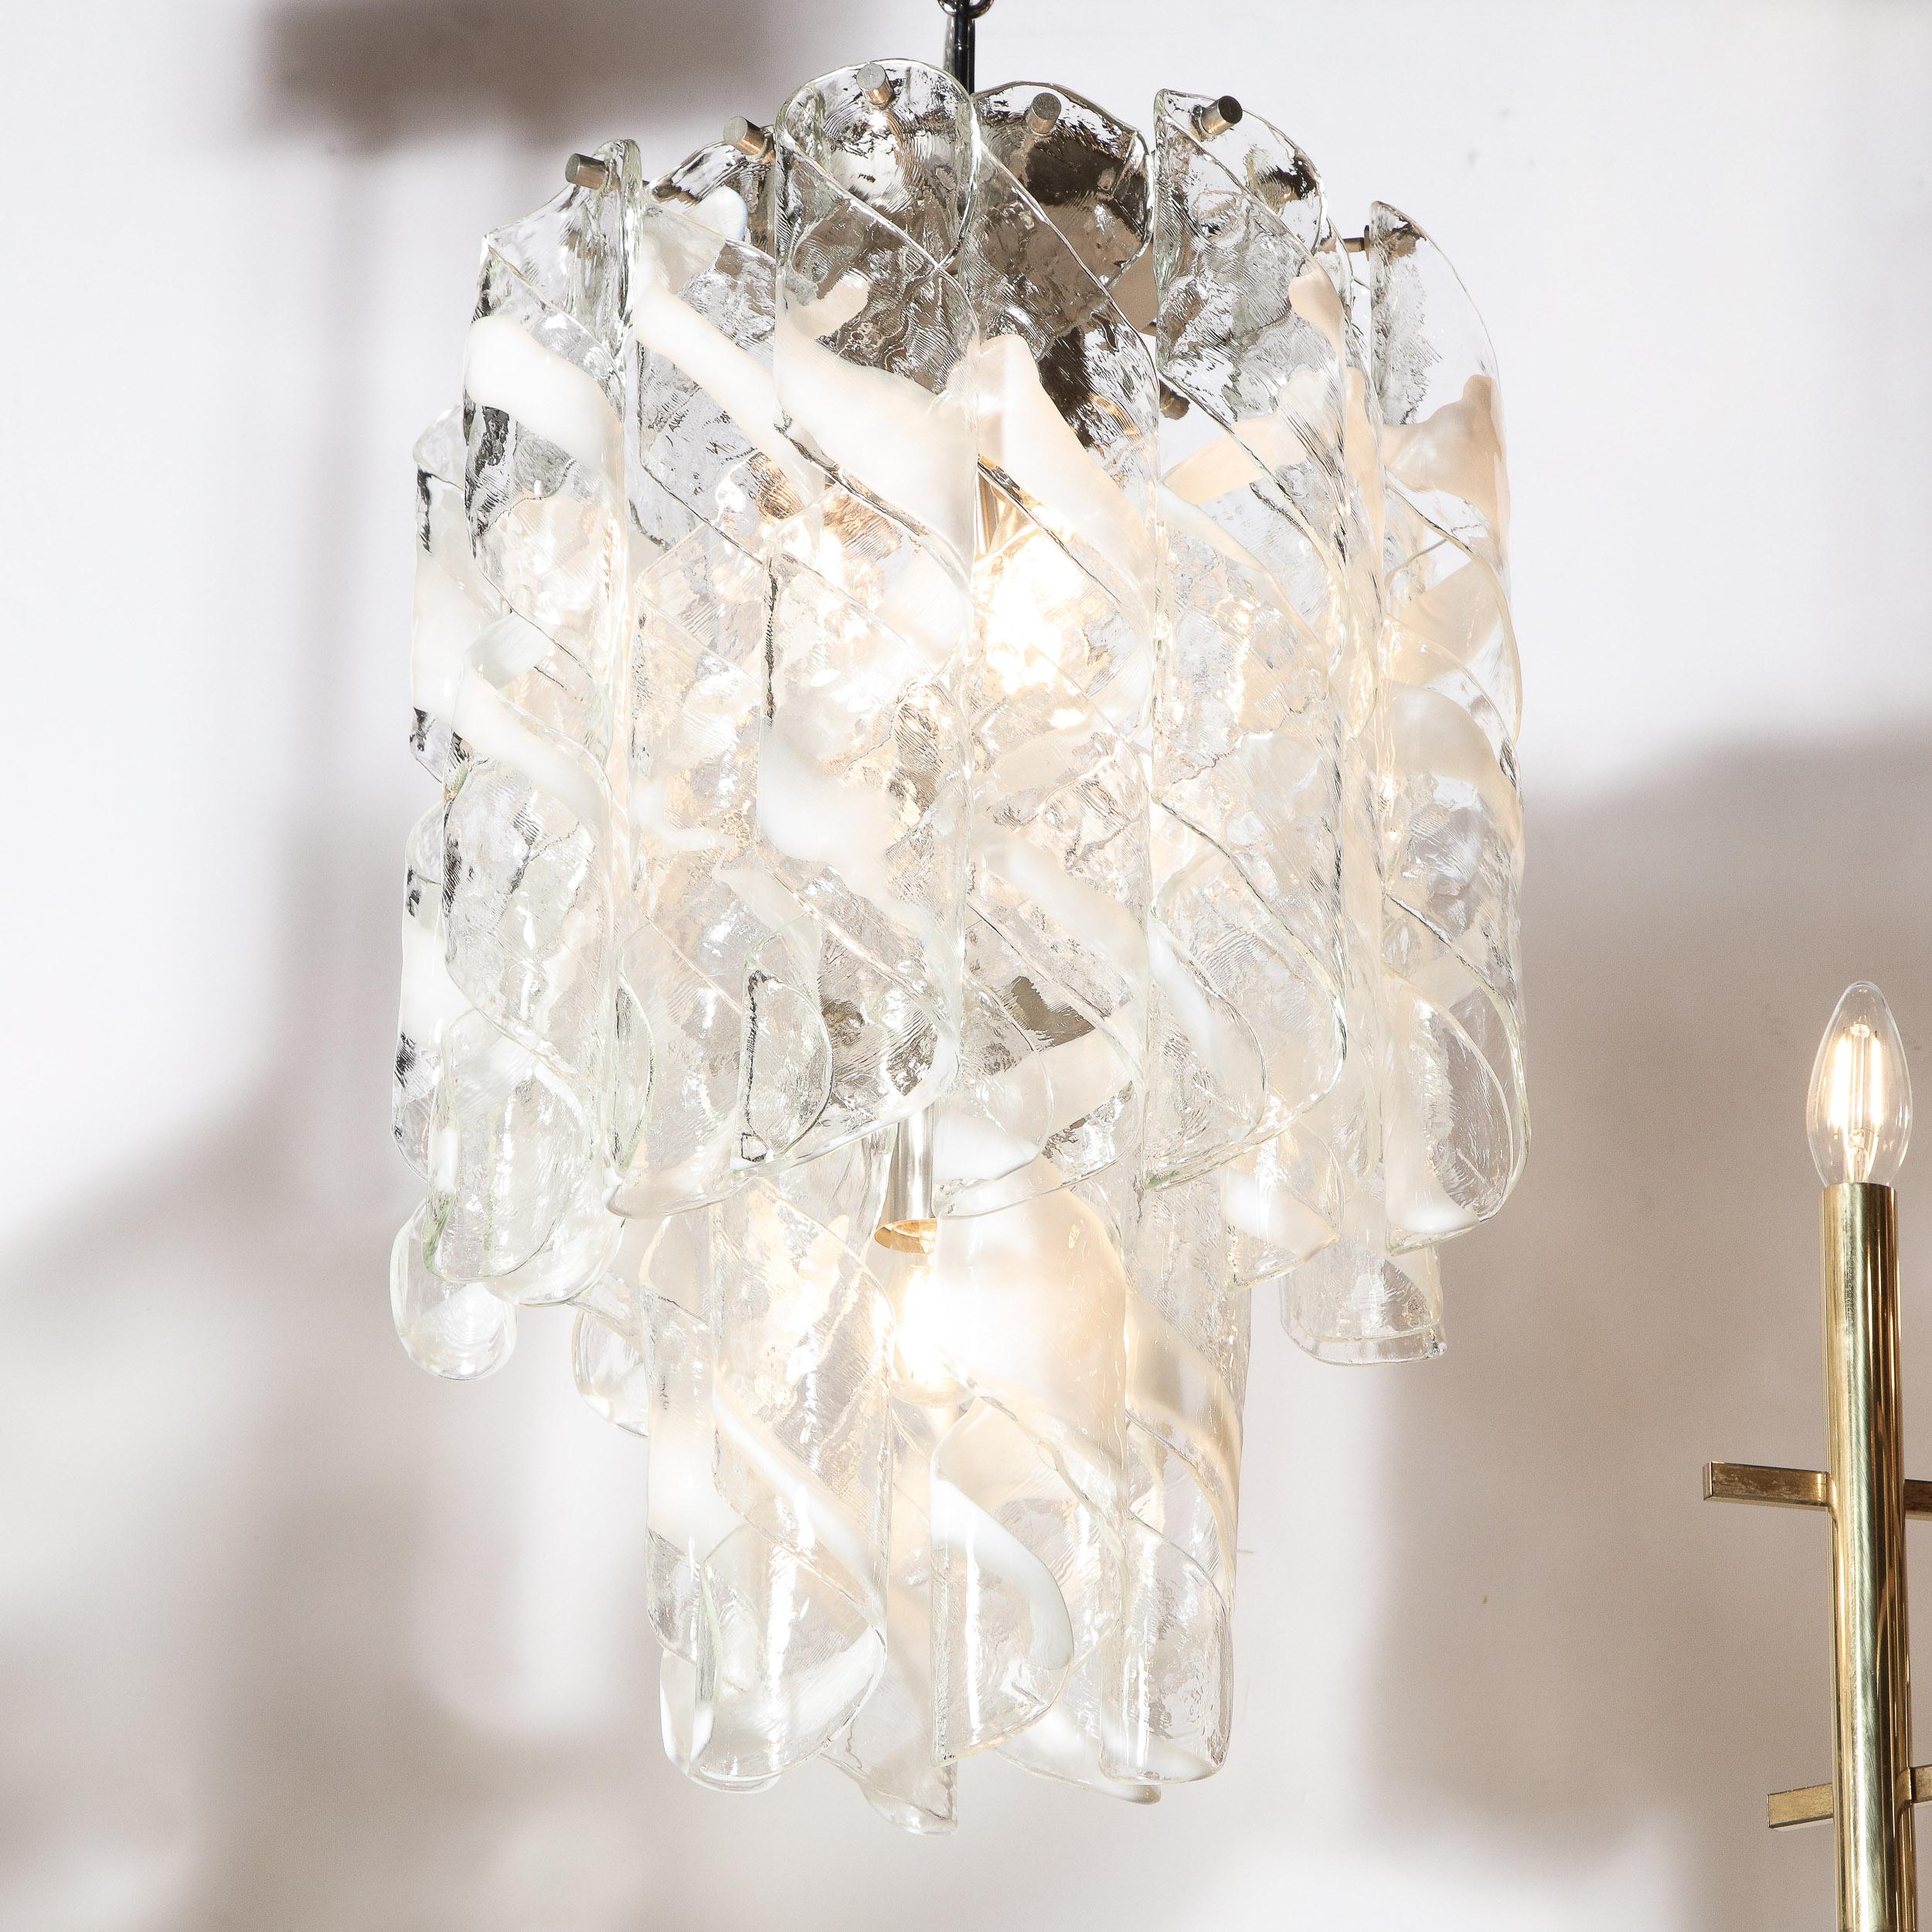 This bold and refined Mid-Century Modern chandelier was realized in Murano, Italy- the island off the coast of Venice renowned for centuries for its superlative glass production, circa 1970. It features a wealth of cylindrical helix form shades in